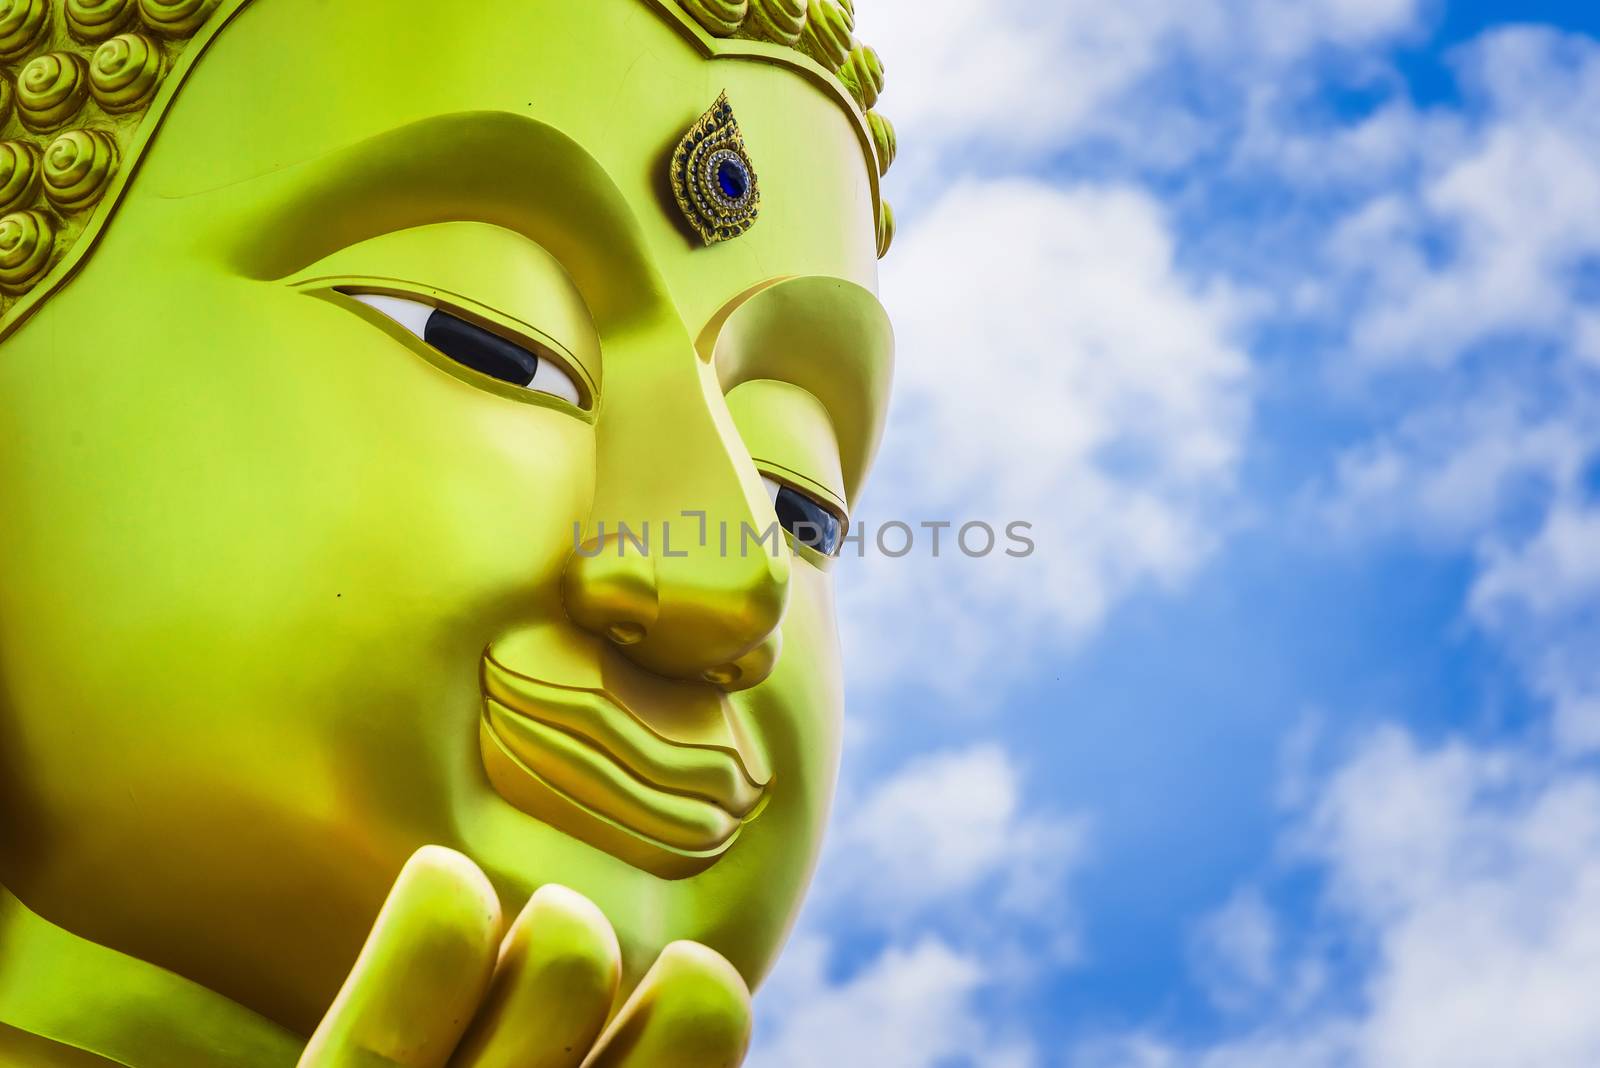 The face of Big Goldden Buddha statue of Chareon Rat Bamrung Tem by Bubbers